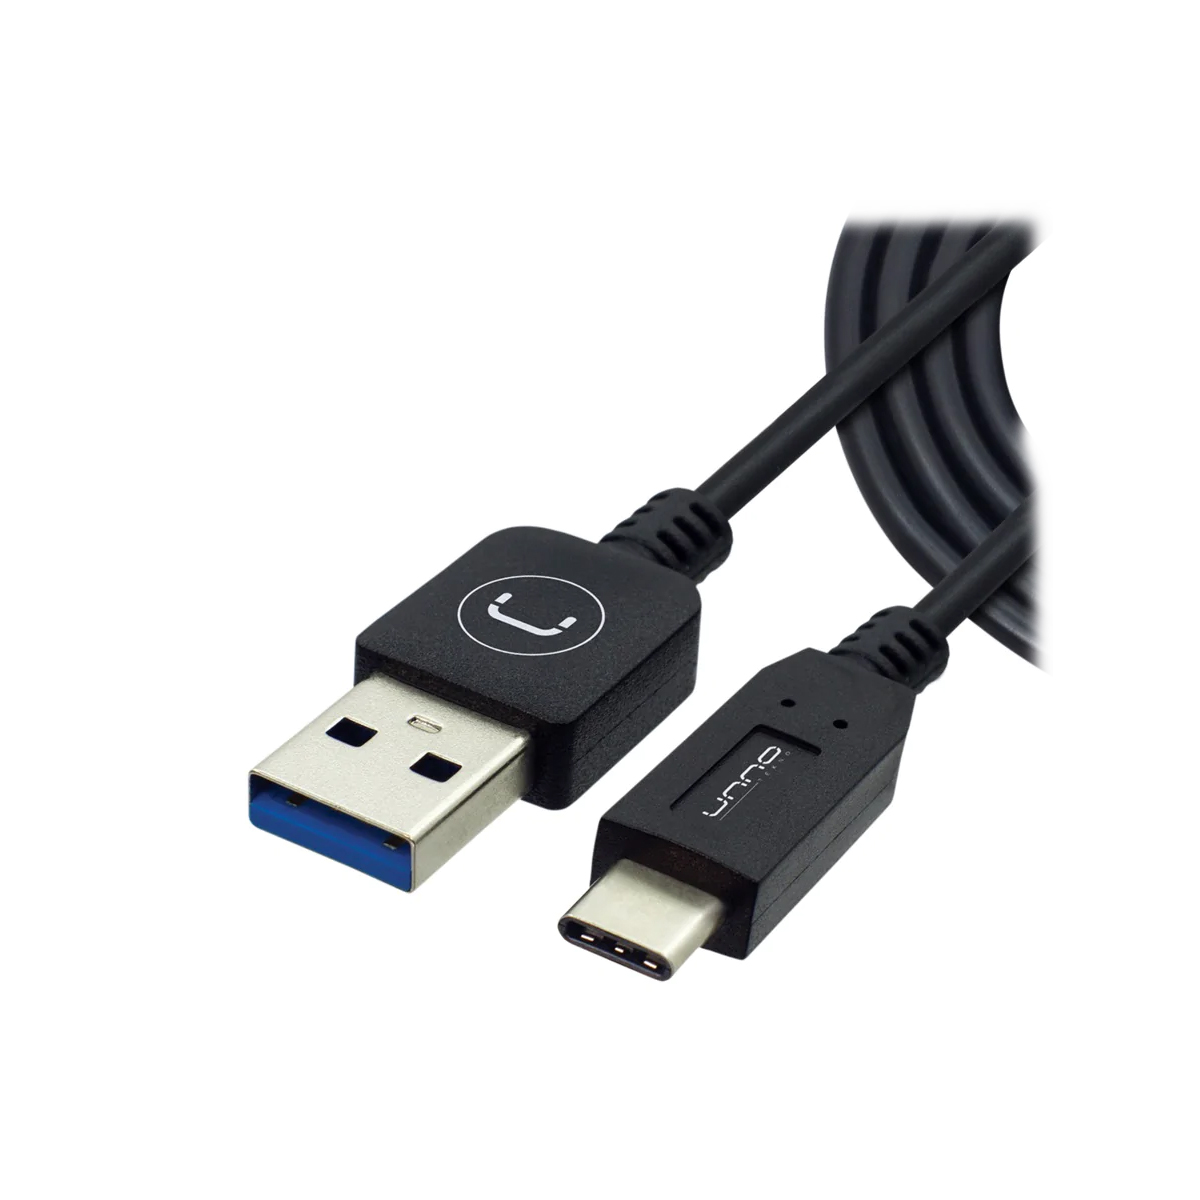 CABLE USB UNNO CB4054BK TIPO USB A   C   USB 3 0   4 8GBPS   1 5M